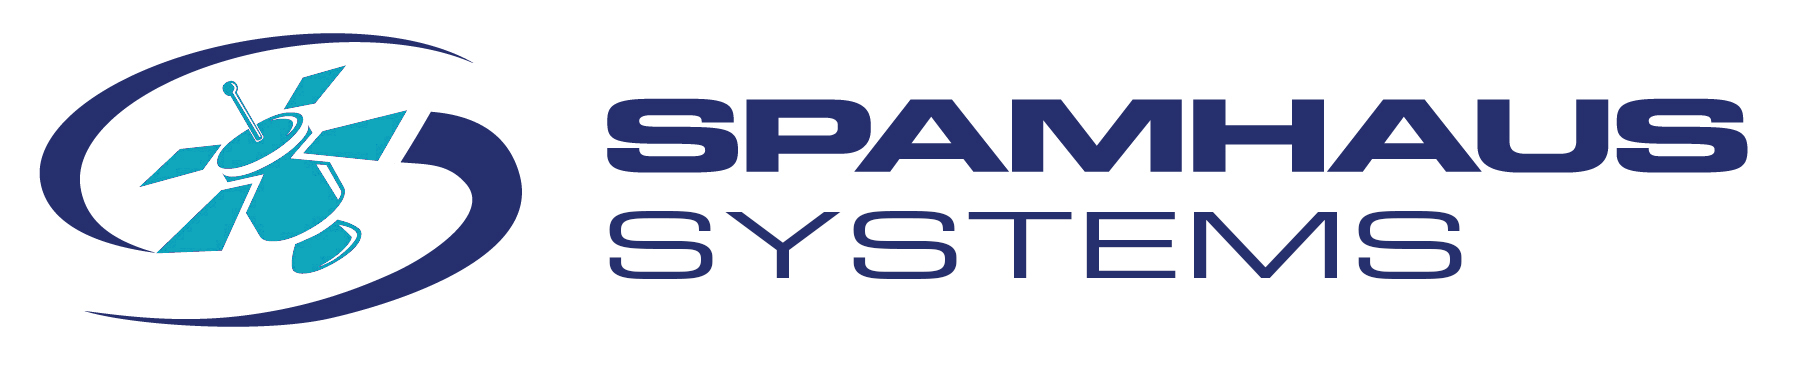 Spamhaus Systems